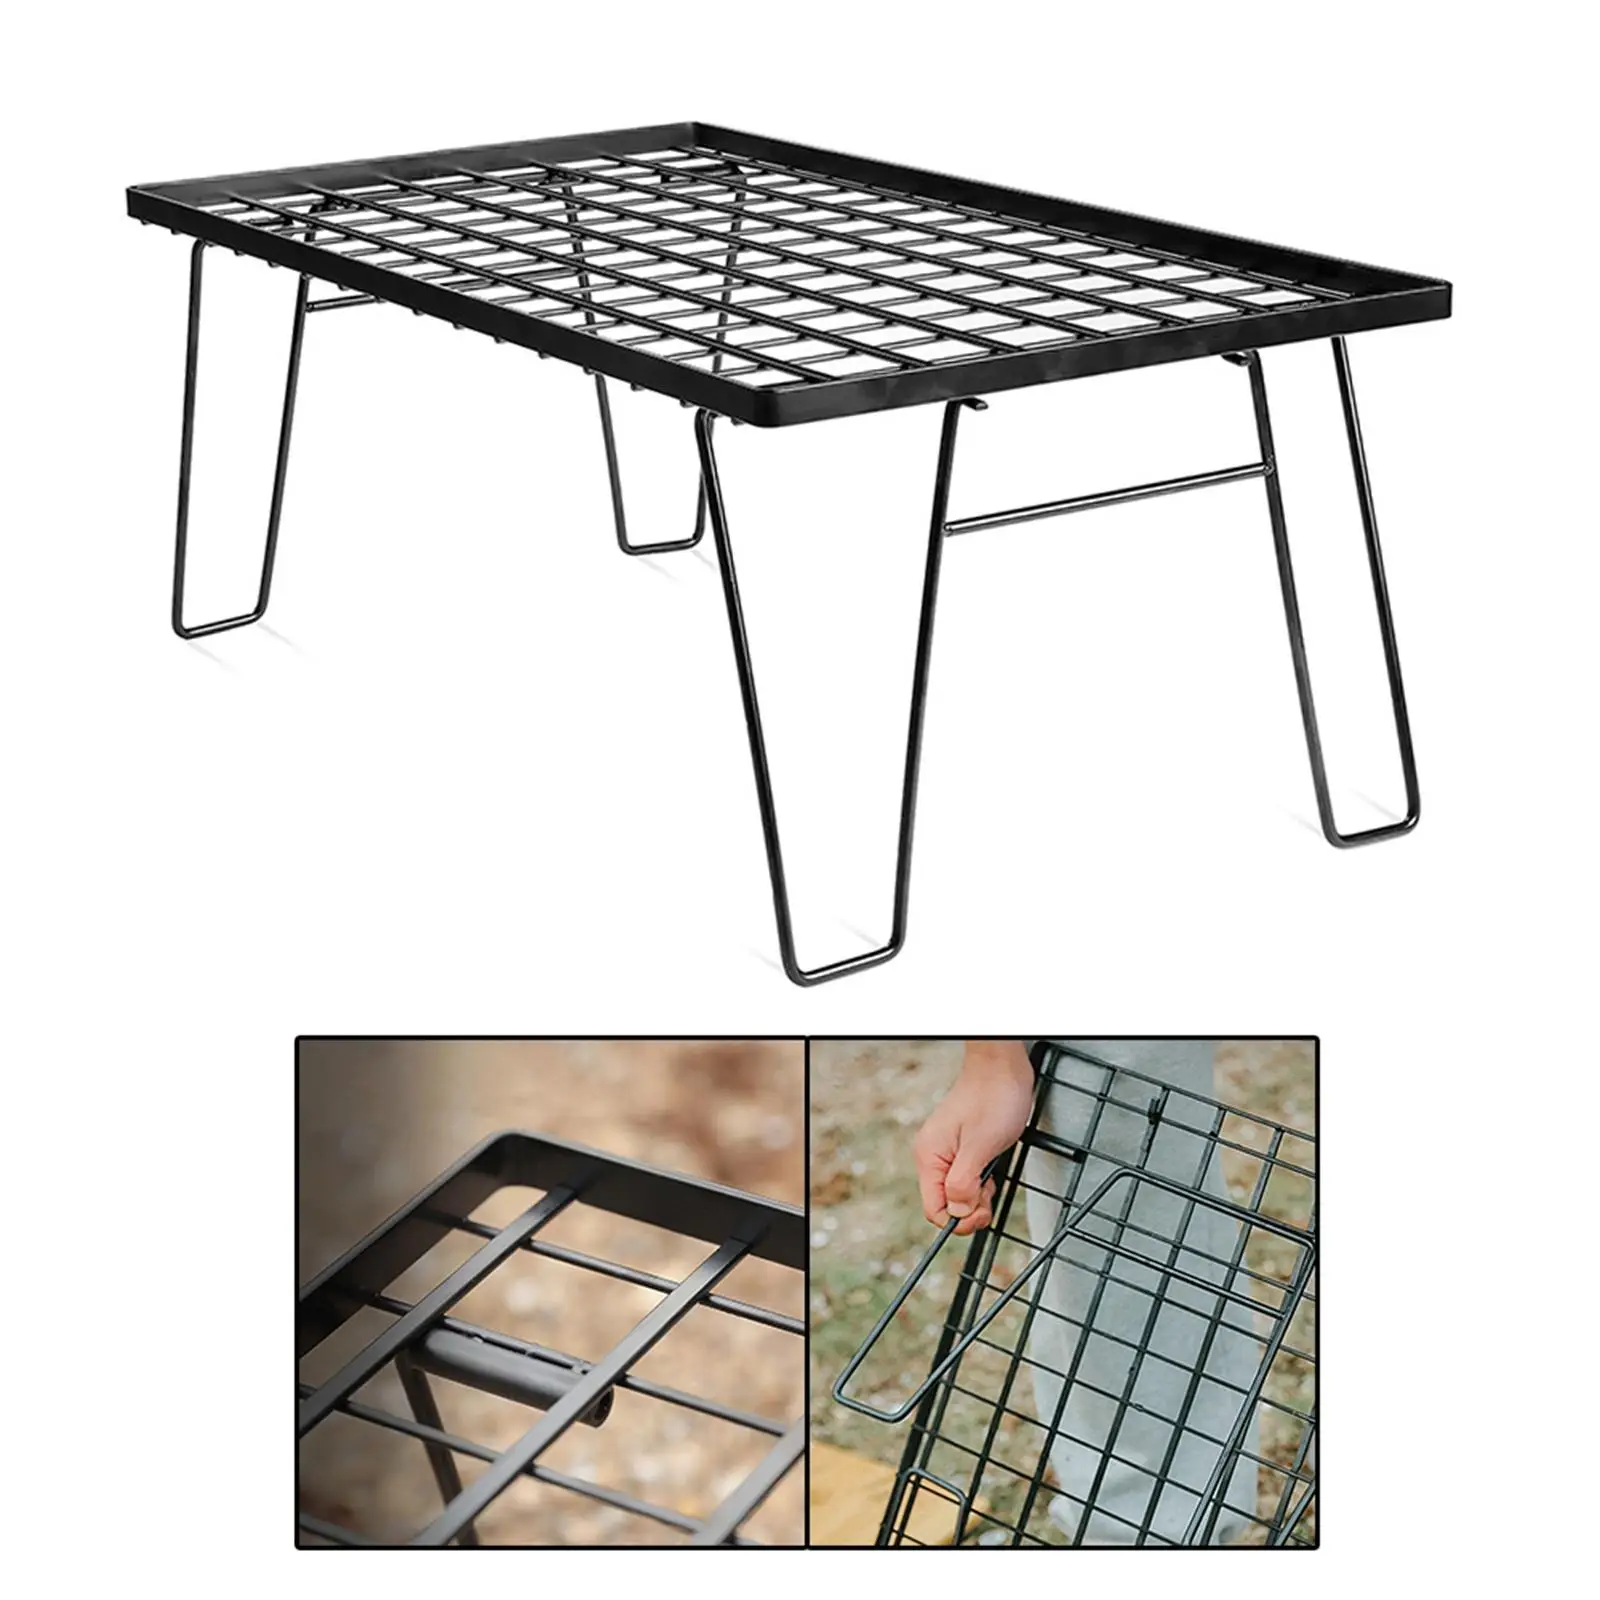 Outdoor Foldable Table Camping Table Campfire Grill for Travel Picnic Fishing Hiking